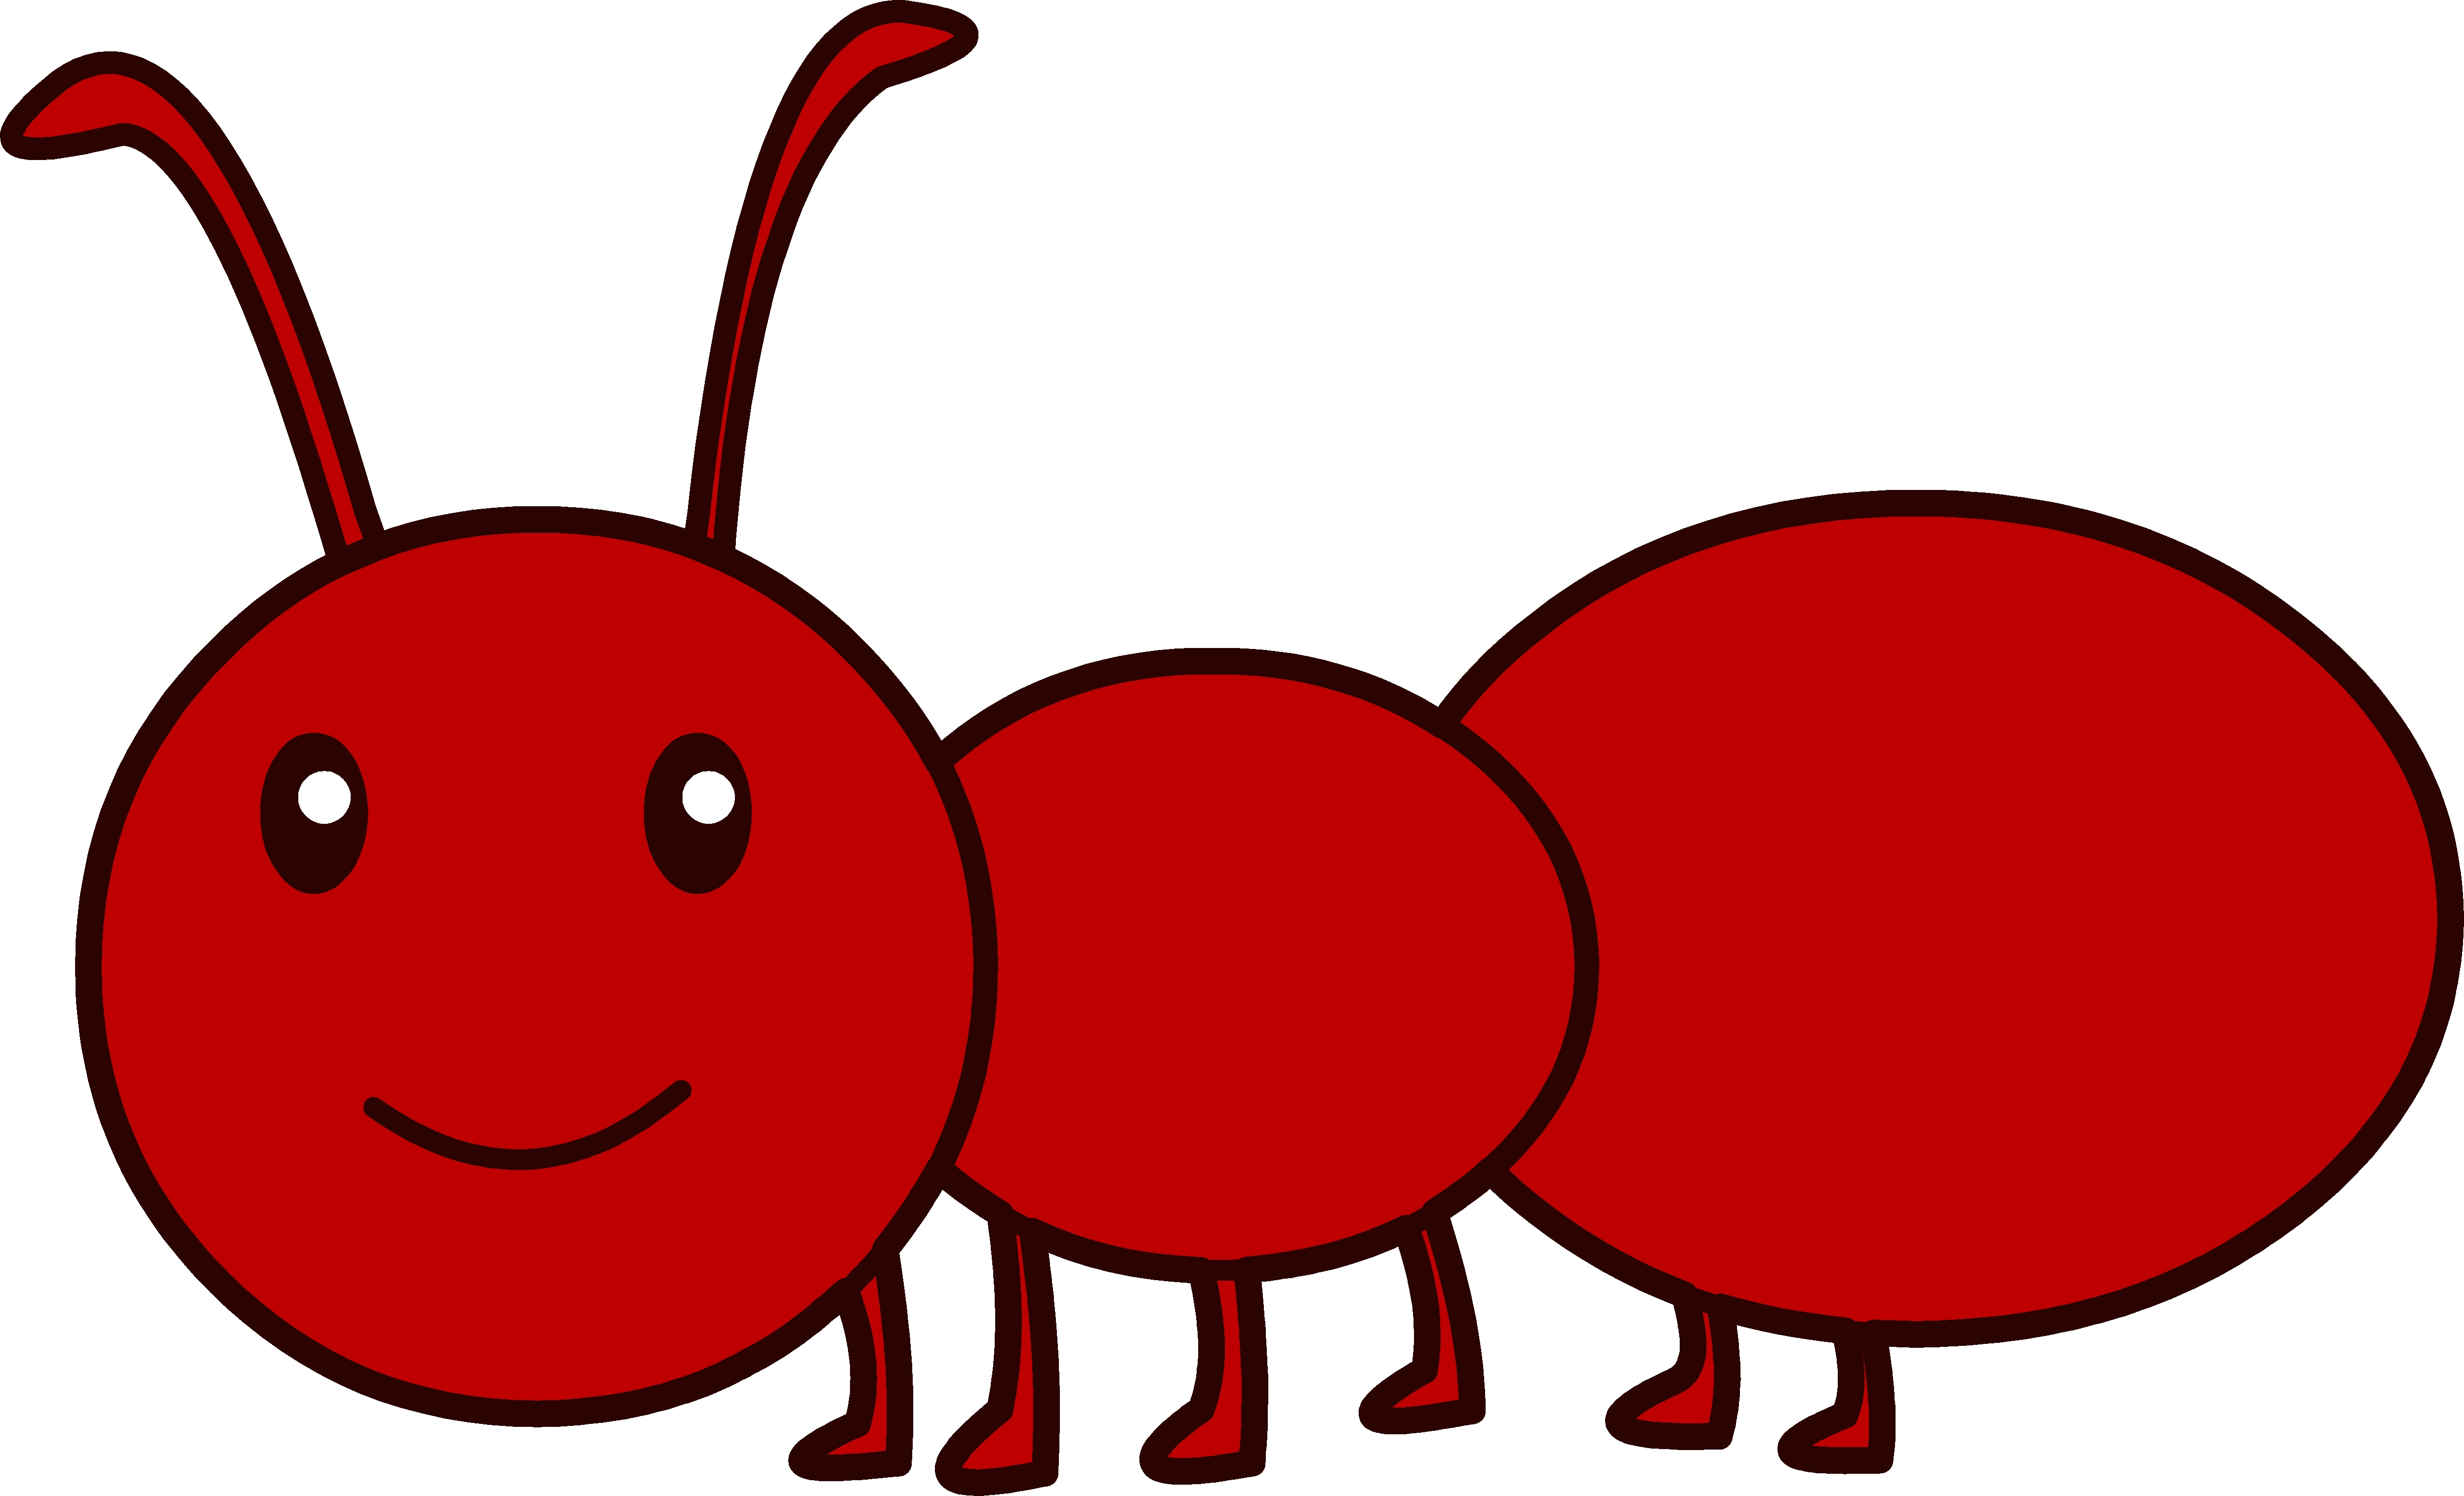 Ant clipart name. New design digital collection